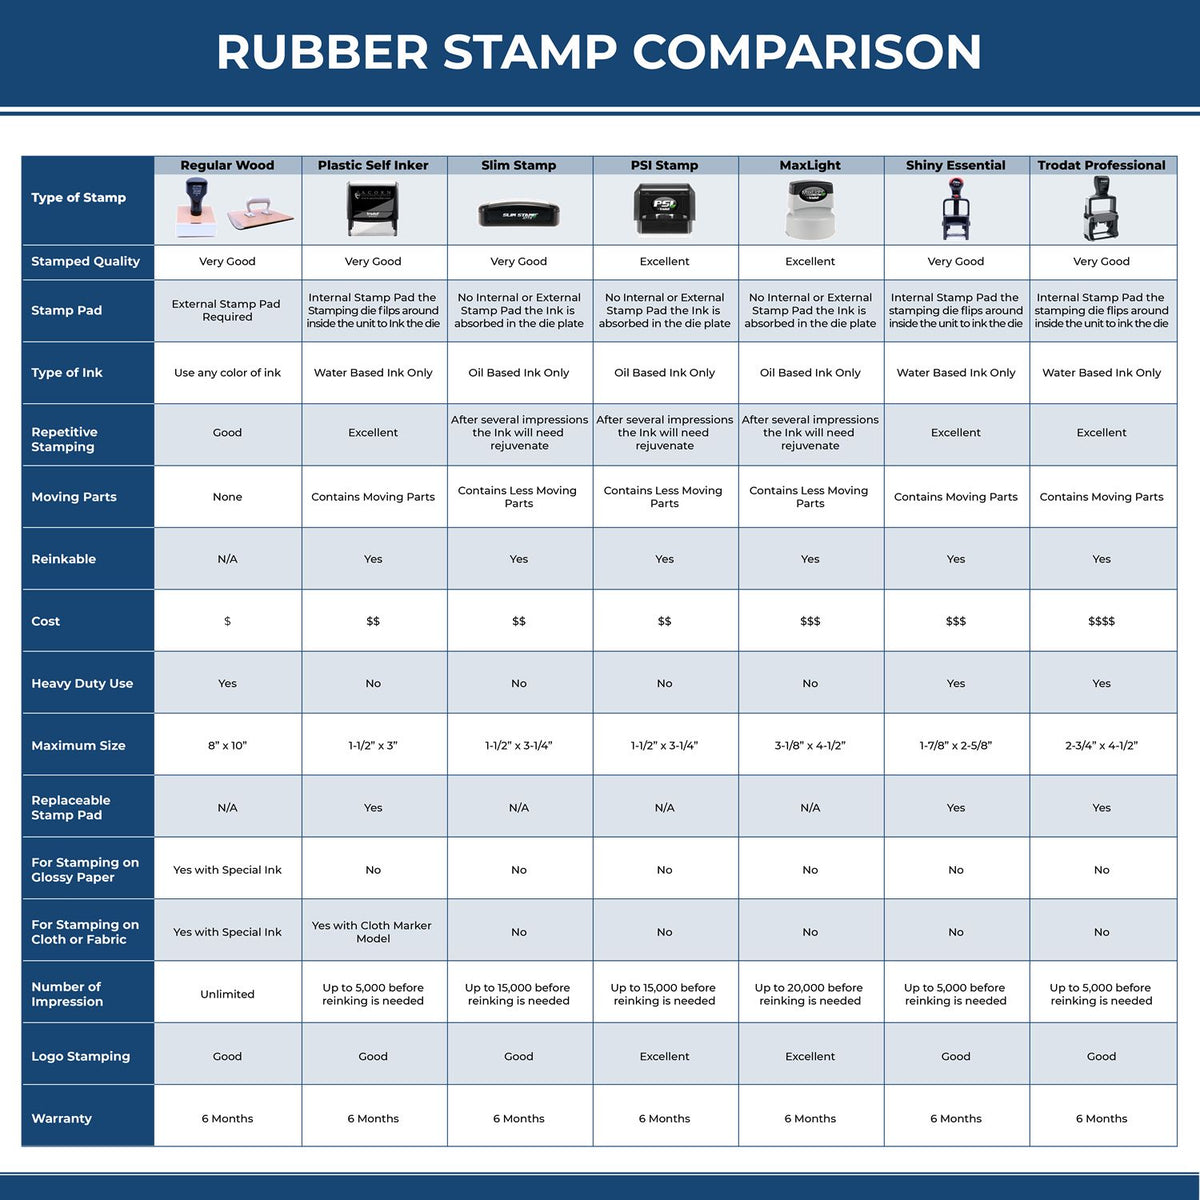 Social Distancing 6 Feet Rubber Stamp 4484R Rubber Stamp Comparison